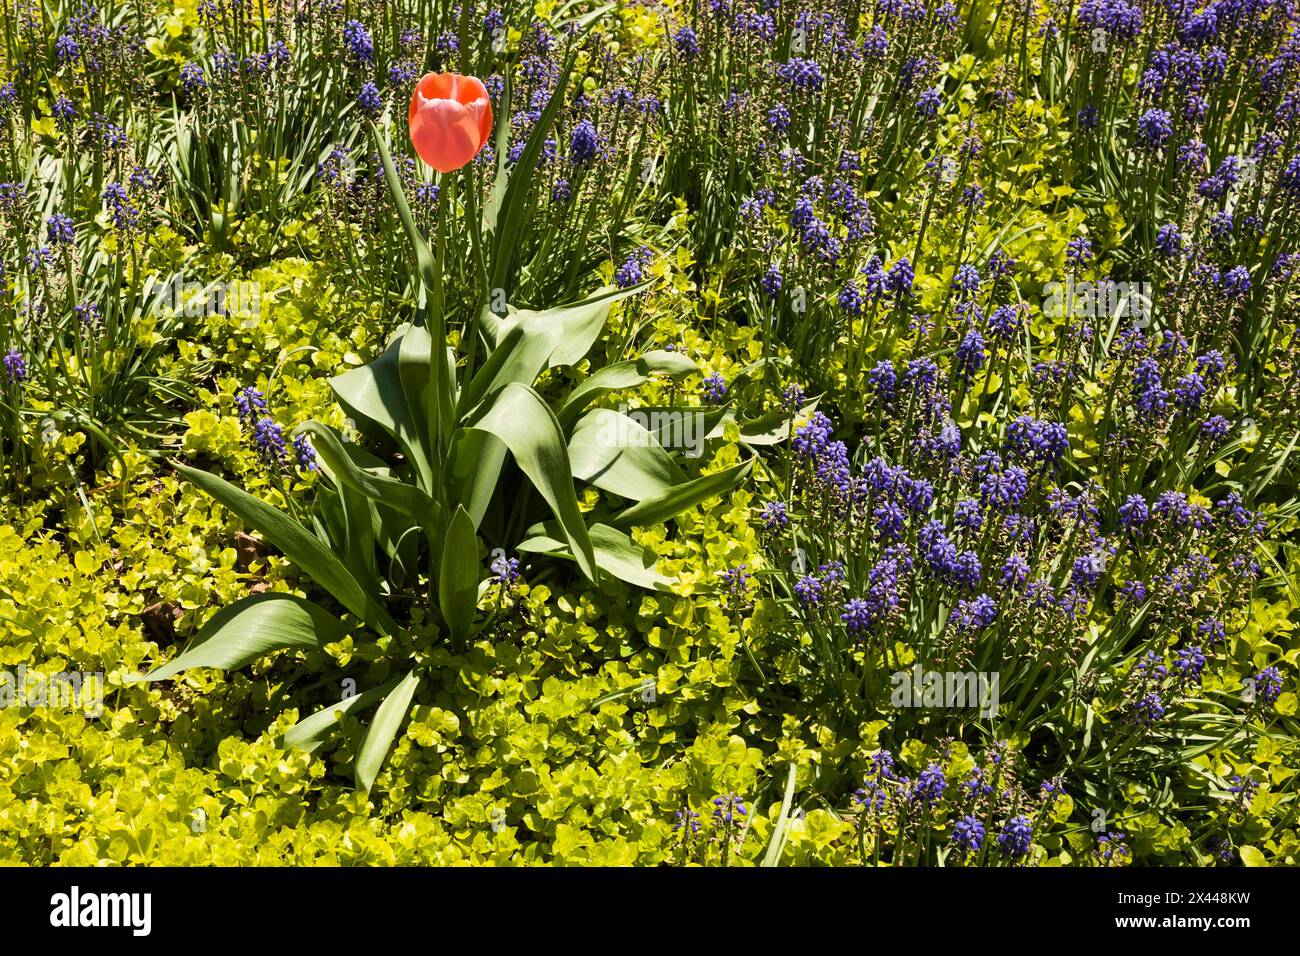 Solitary pink Tulipa, Tulip flower growing in a border with Lysimachia nummularia â€˜Aurea', Golden Creeping â€˜Jenny' plants and blue Muscari Stock Photo